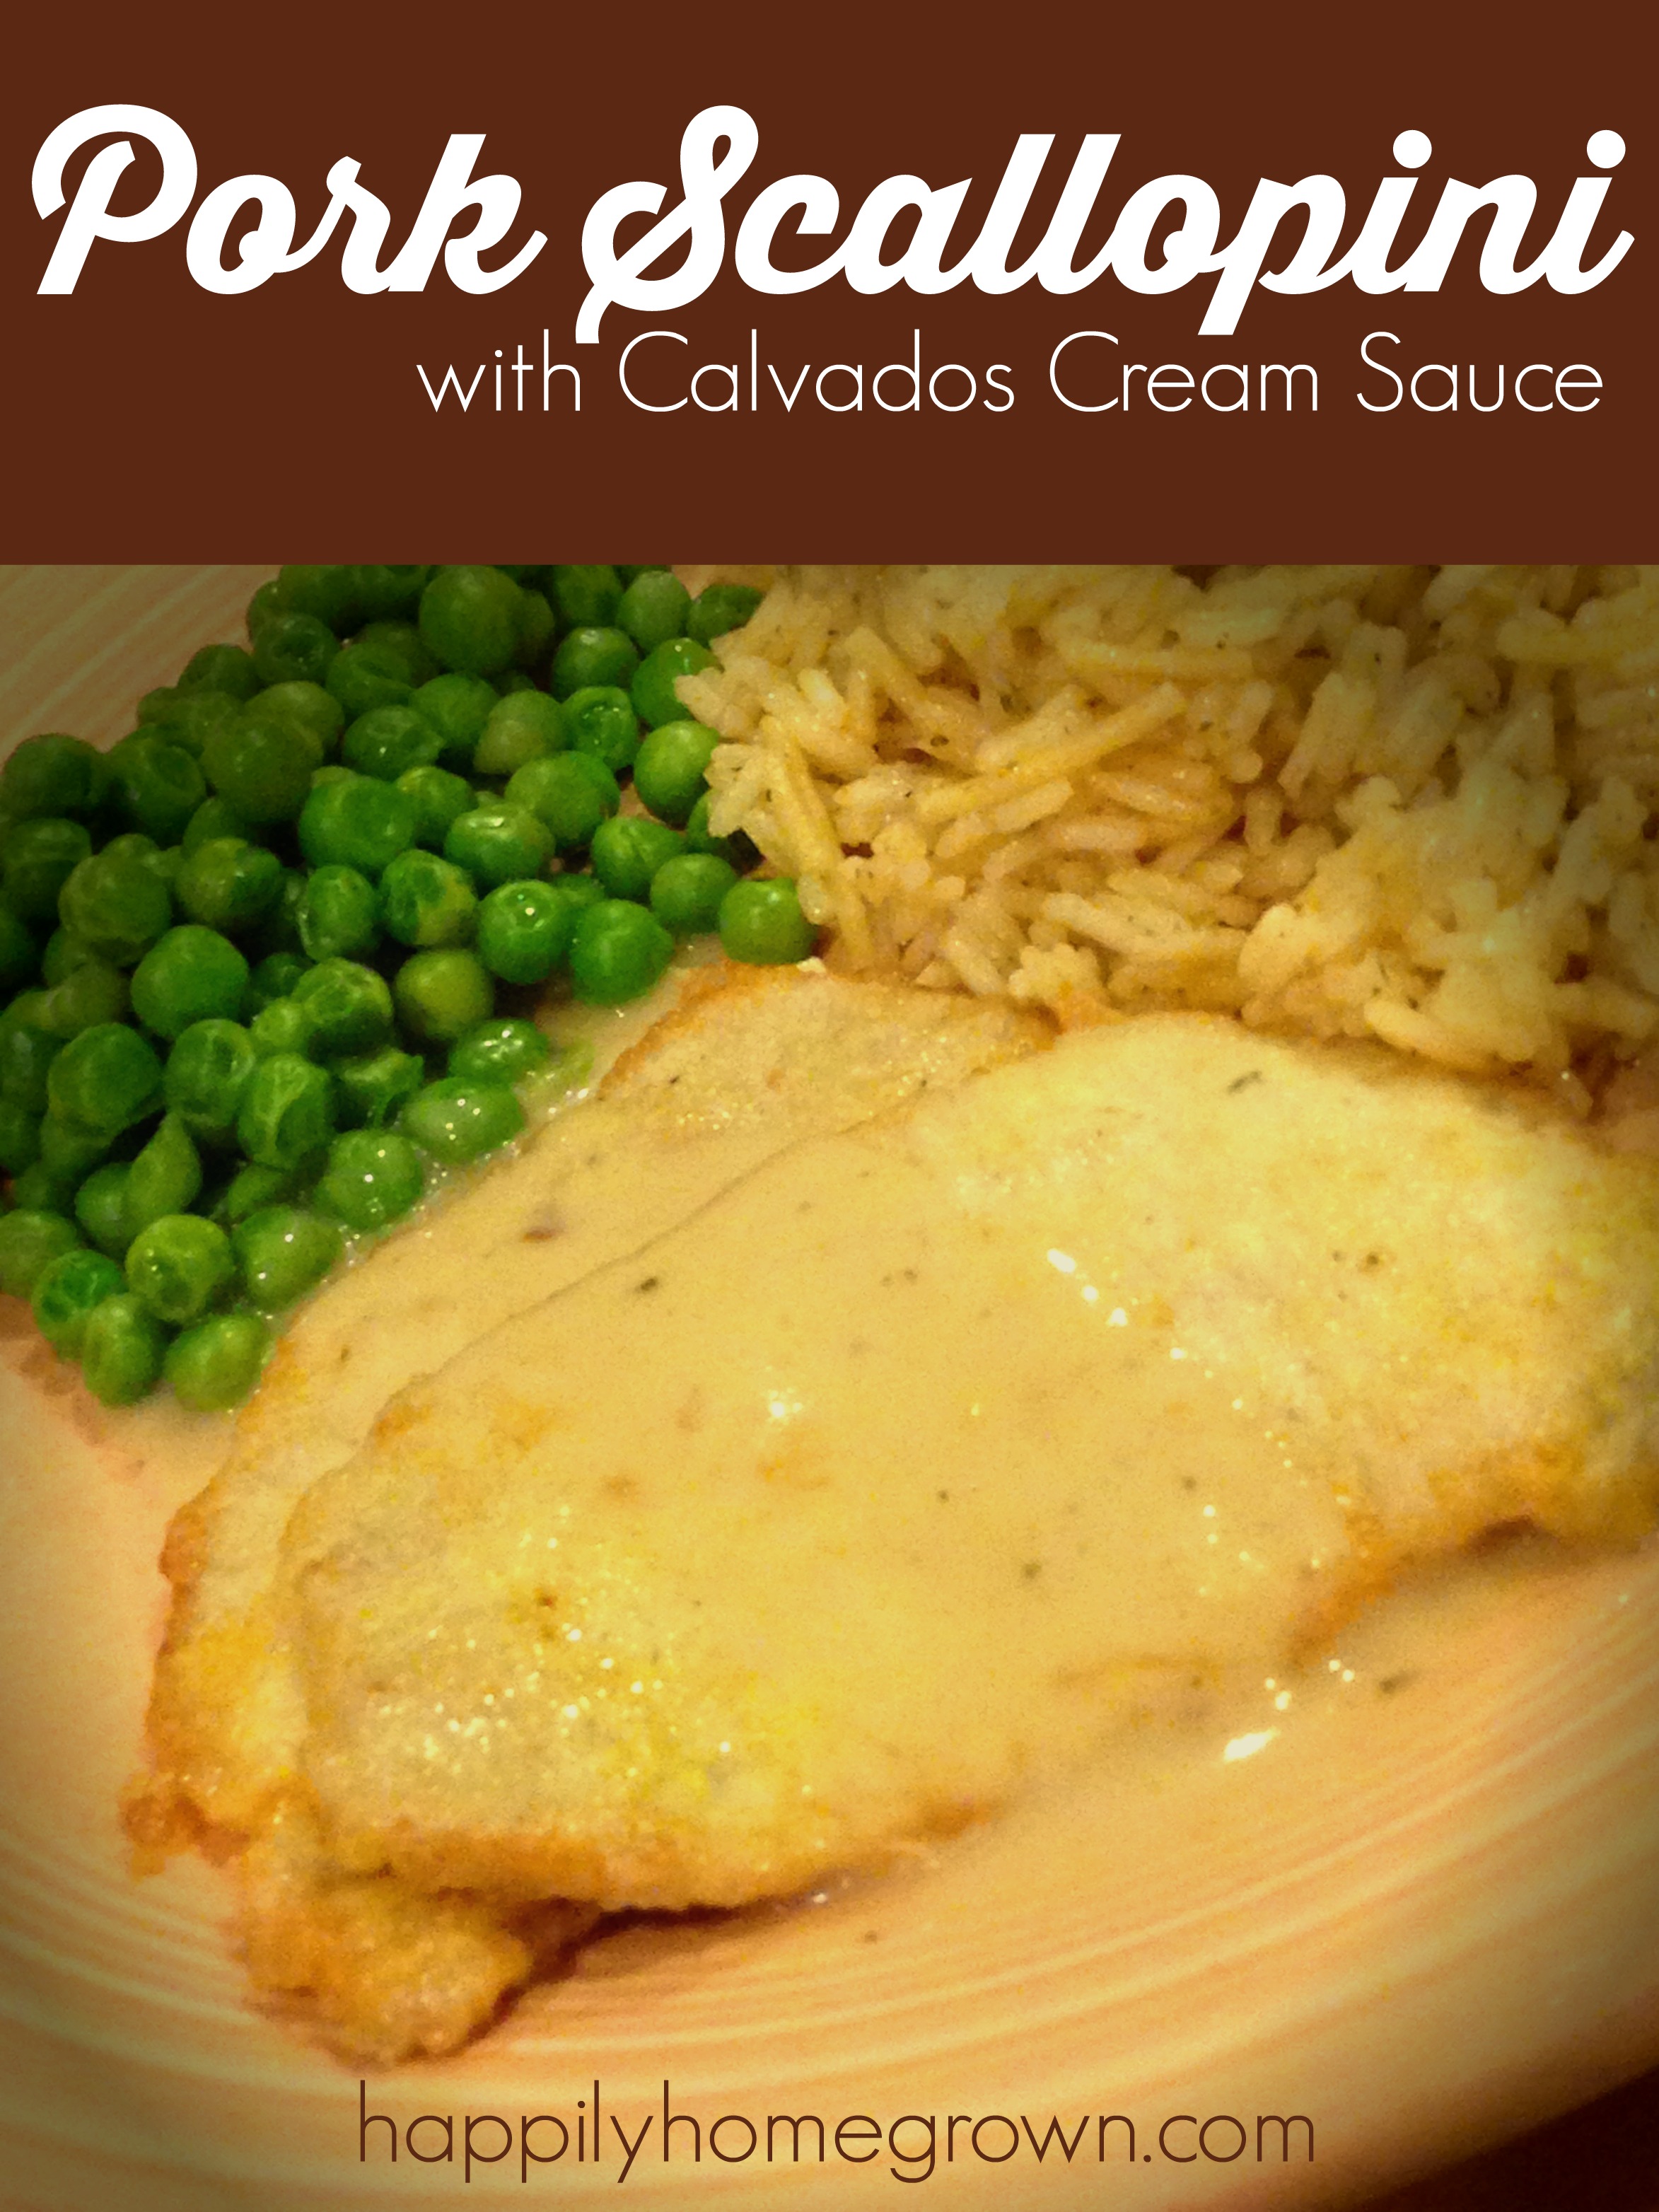 Pork Scallopini with Calvados Cream Sauce is a quick dinner perfect for a mid-weed meal, but elegant enough for entertaining.